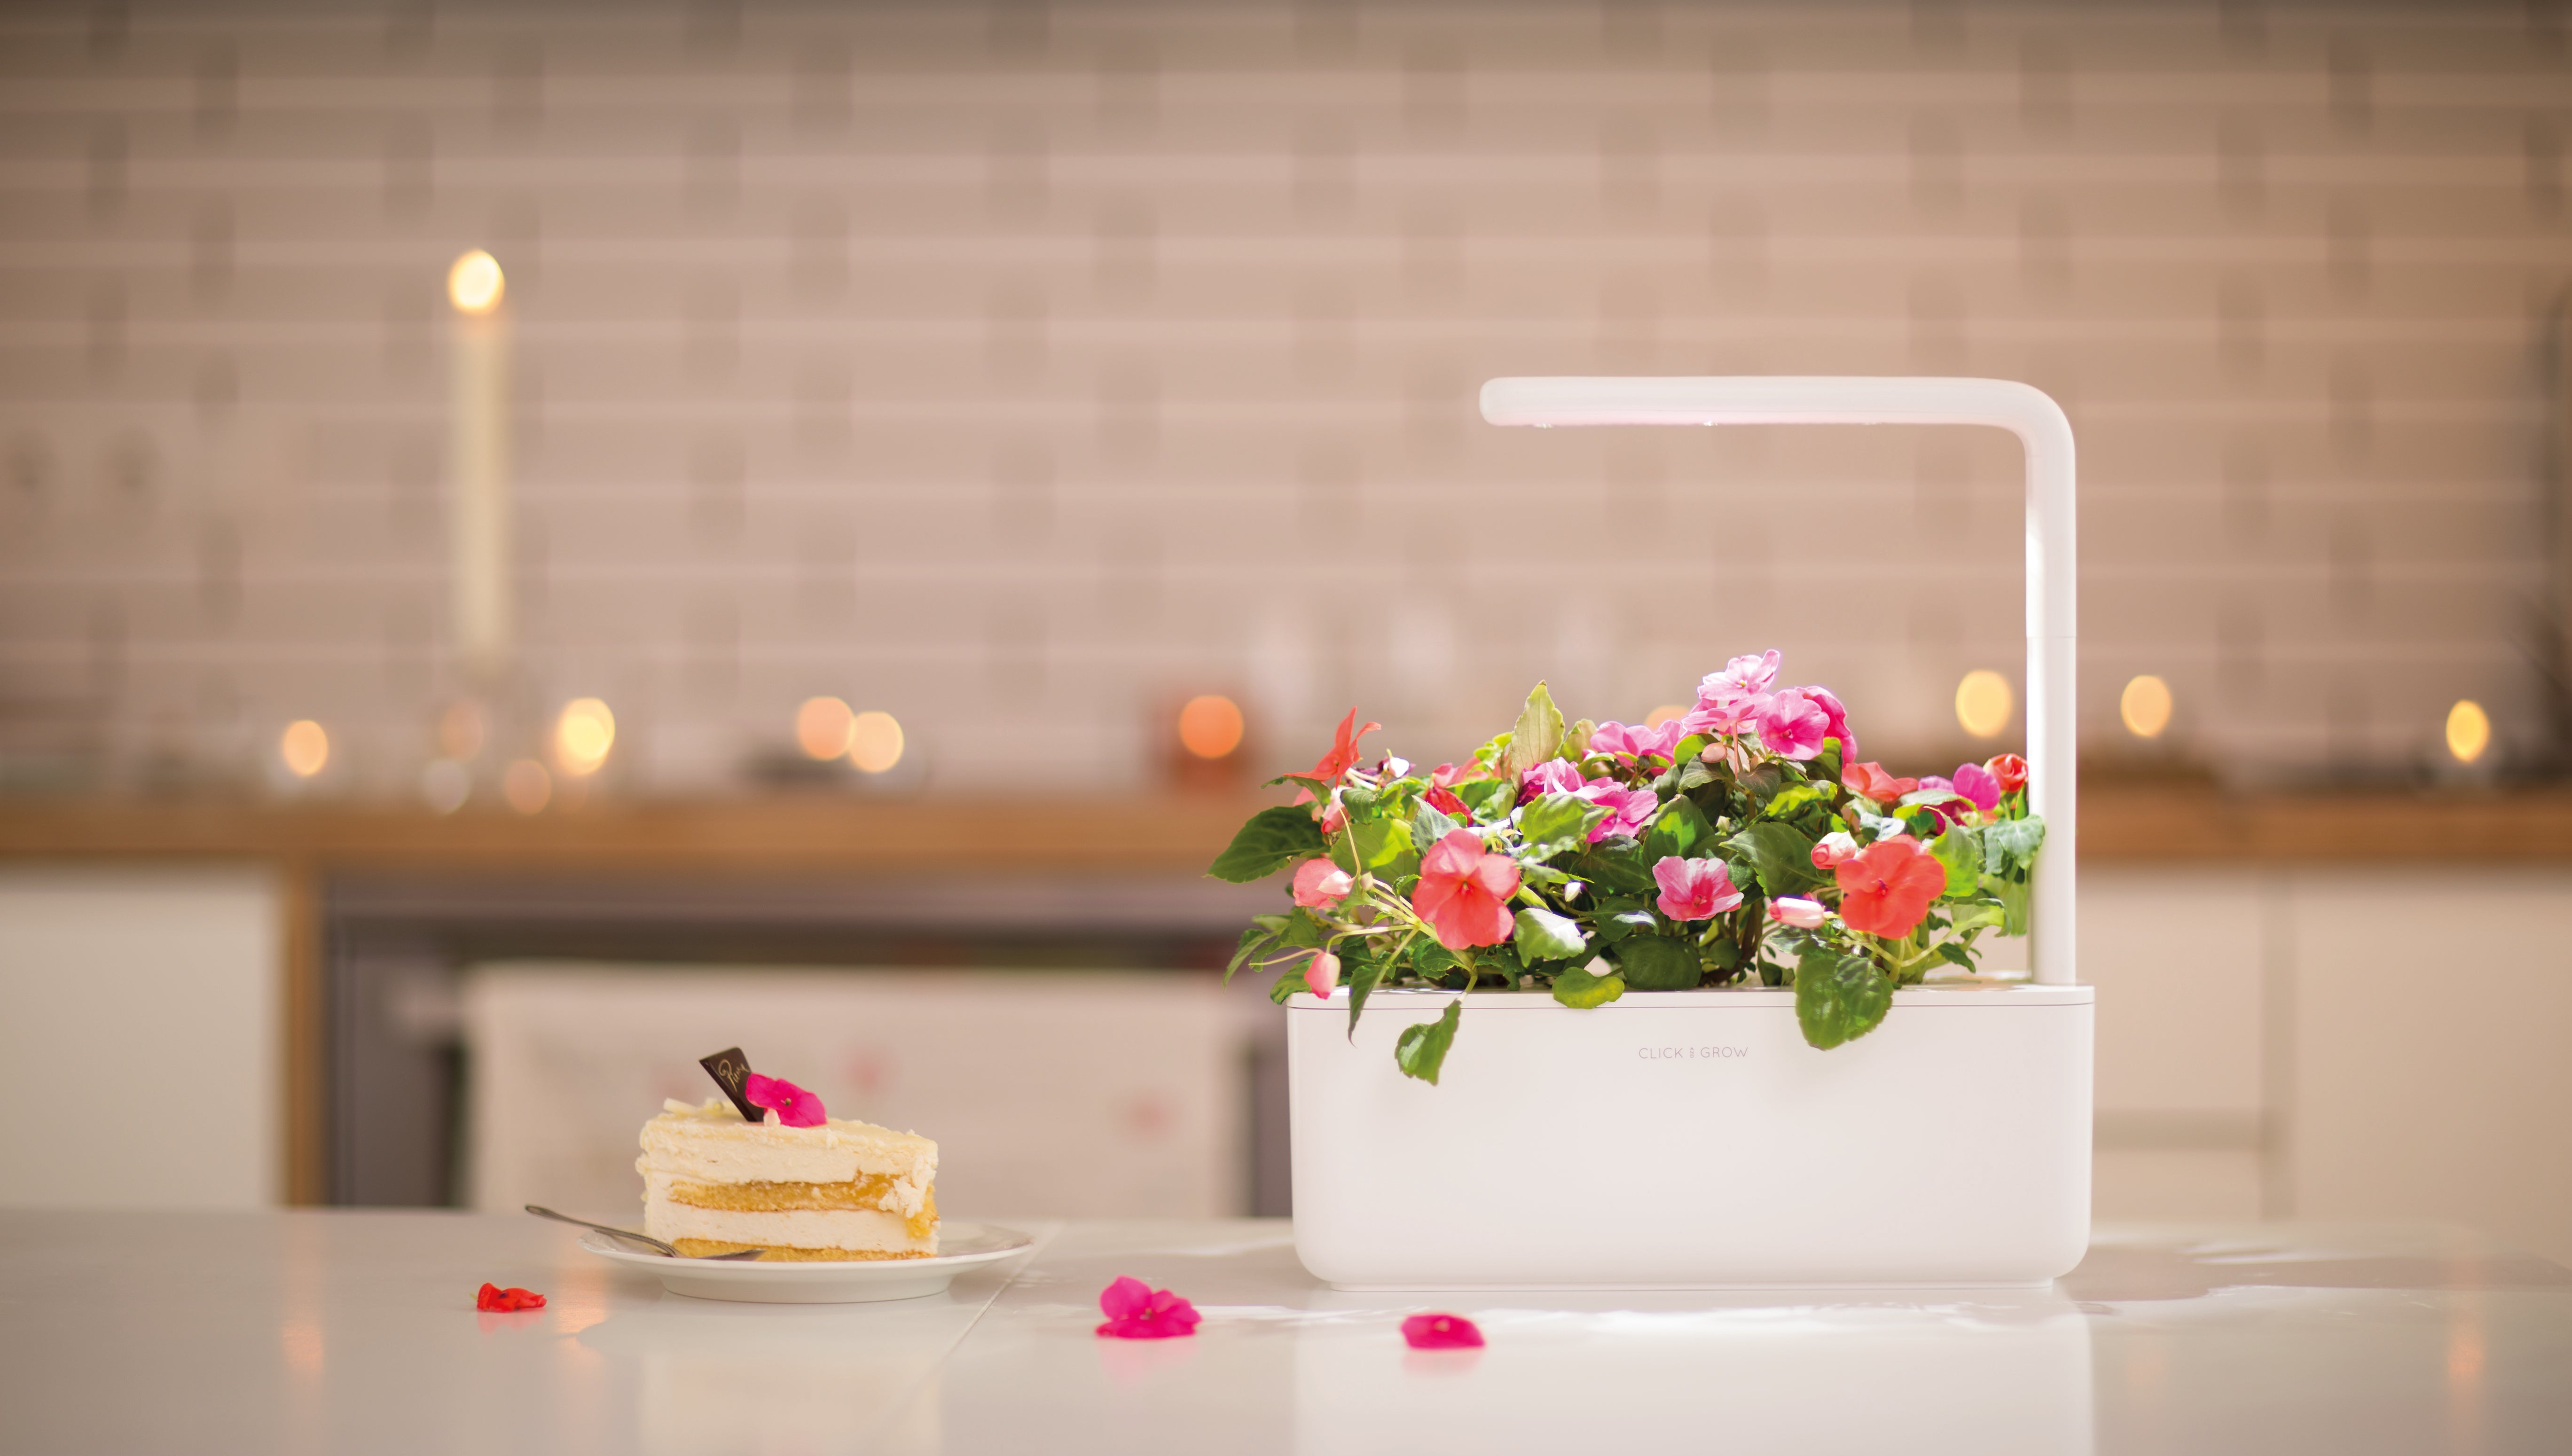 Click & Grow Smart Garden 3 with Piece of Cake next to it